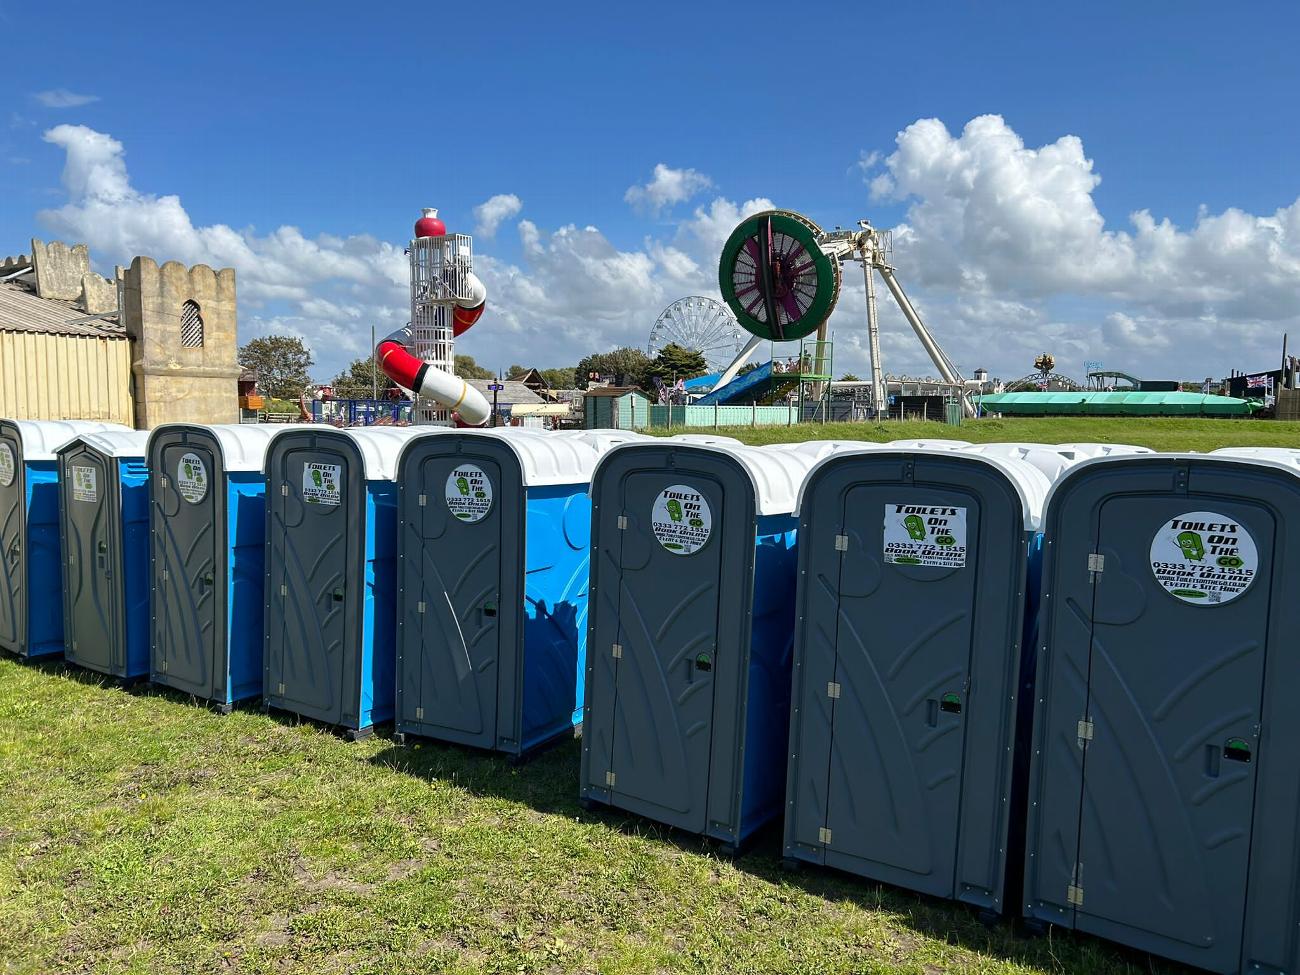 Gallery | Portable Toilet Loo Hire Rental Company in North West uk and Manchester gallery image 56